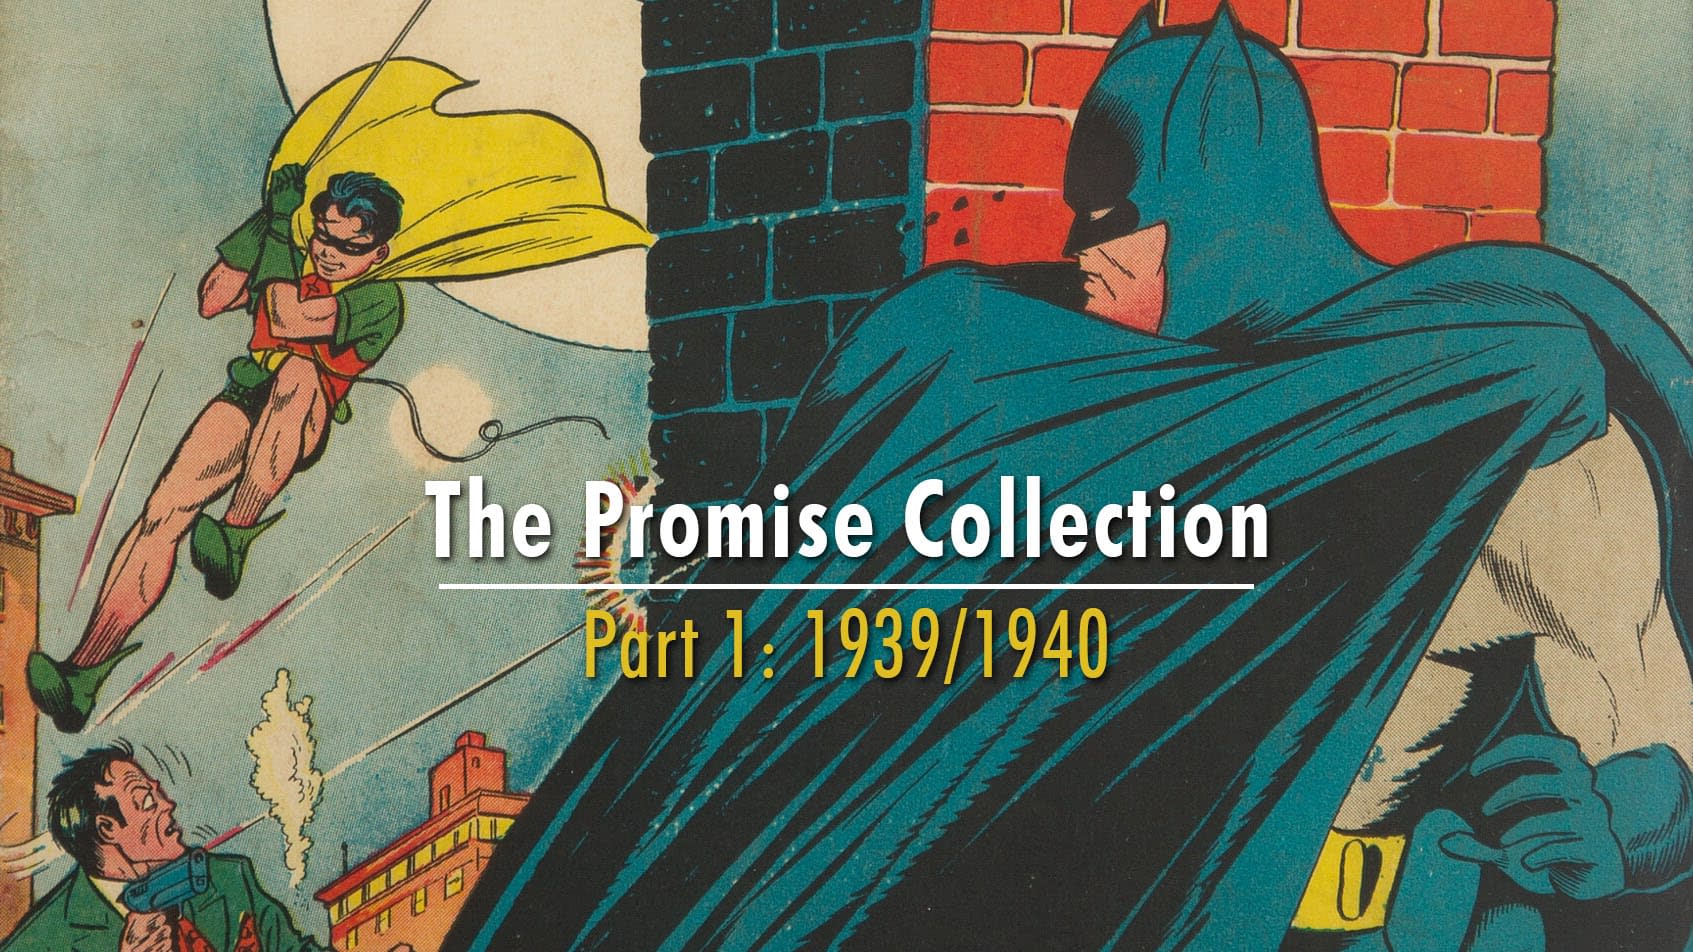 The Promise Collection 1939/1940: It Begins With Batman